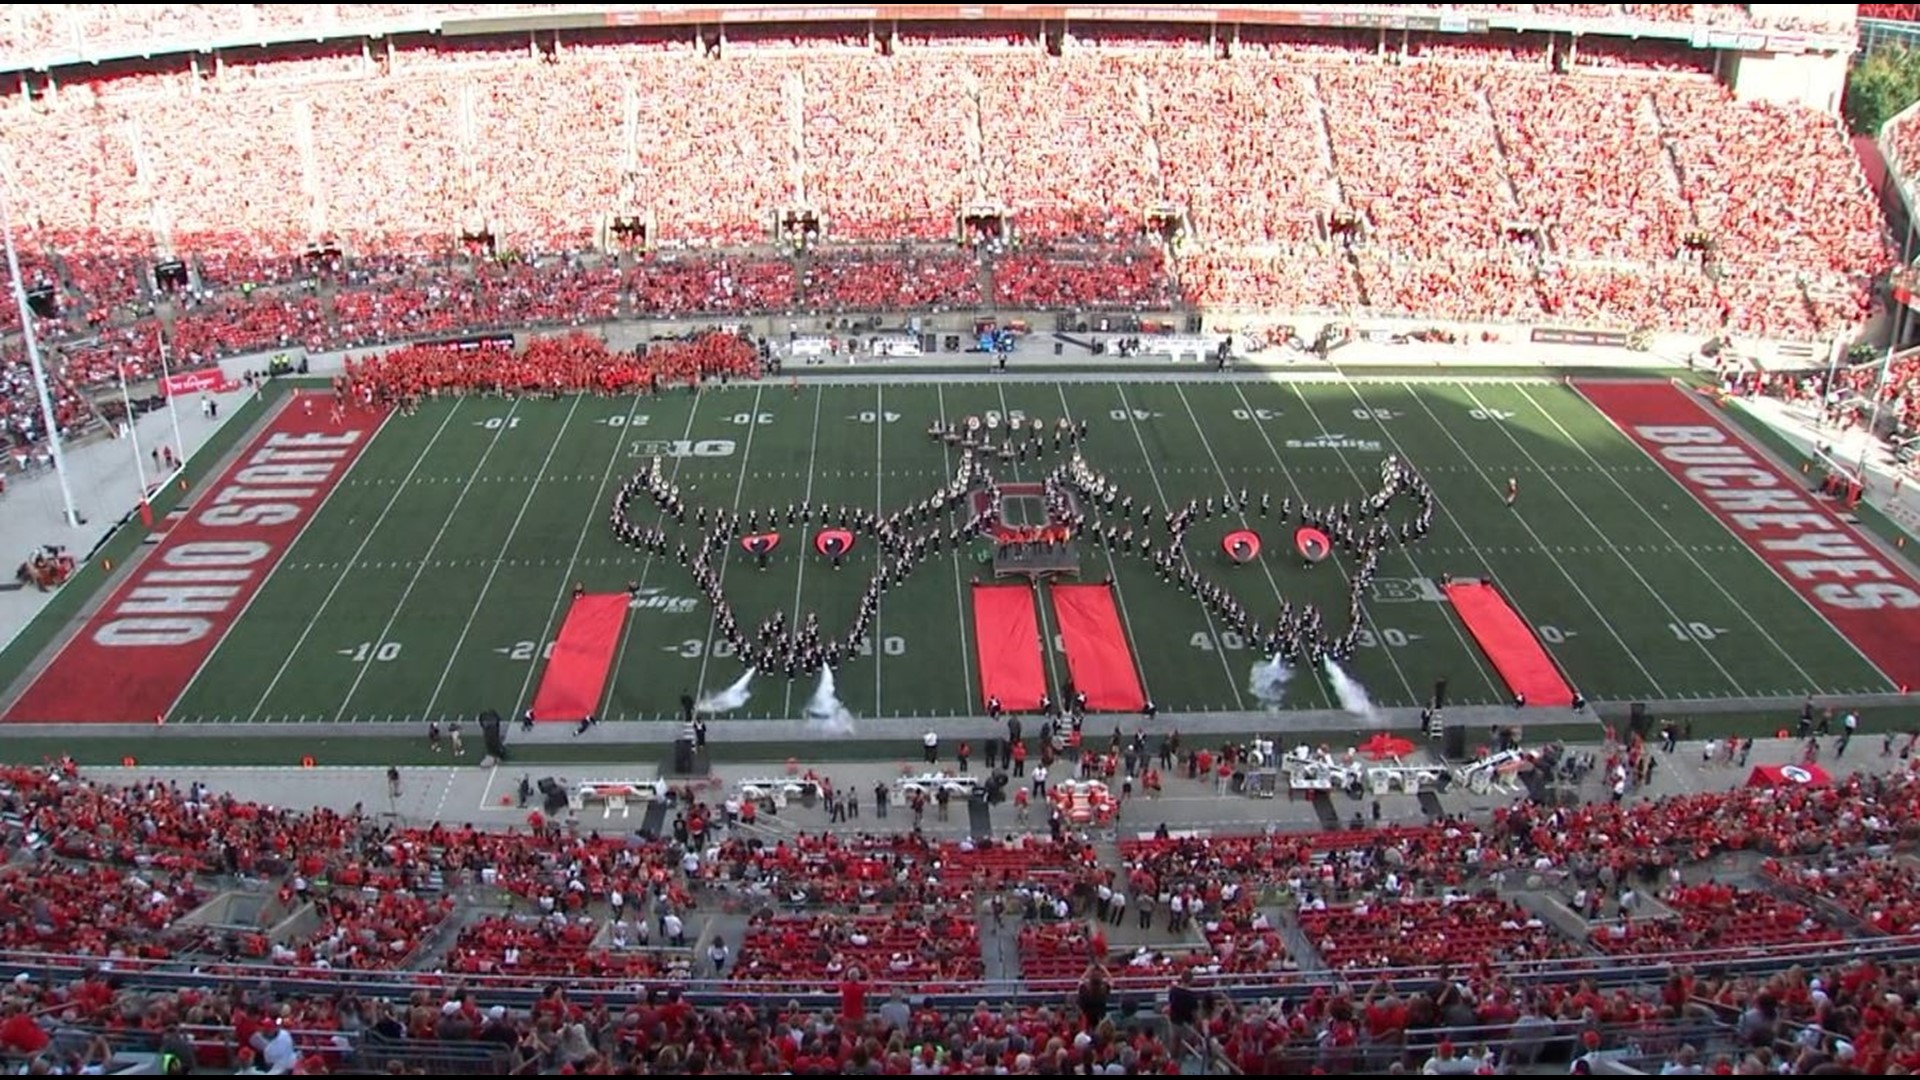 In the second home game of the season, the Ohio State Marching Band performed a medley of songs to honor Hispanic Heritage Month.